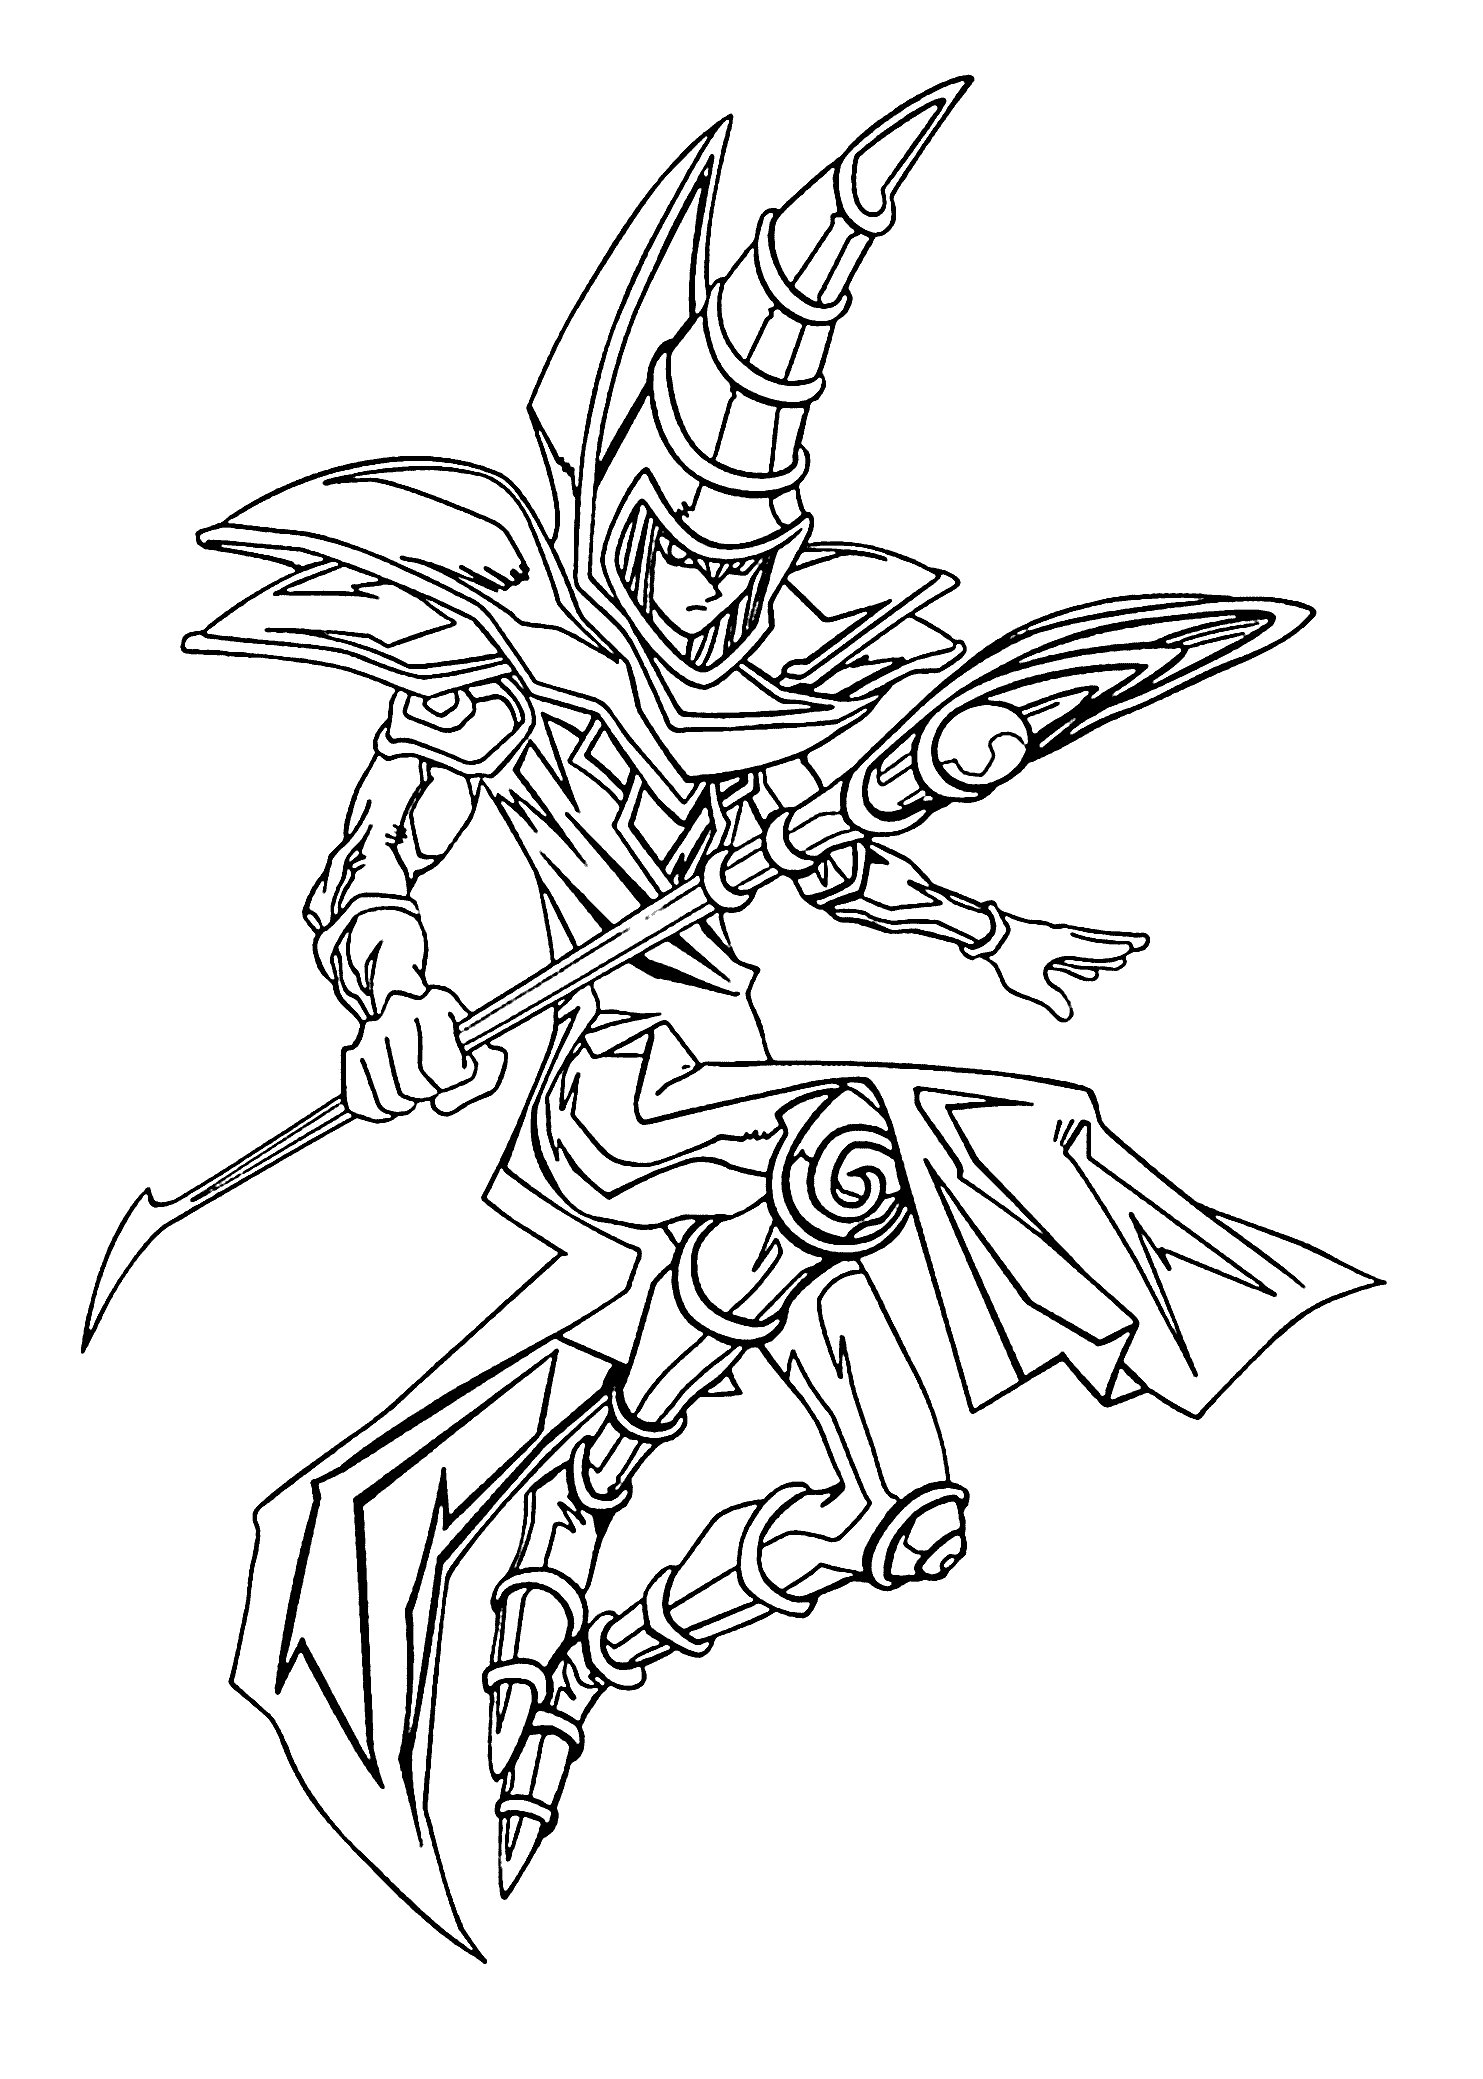 Yu gi oh coloring pages to download and print for free